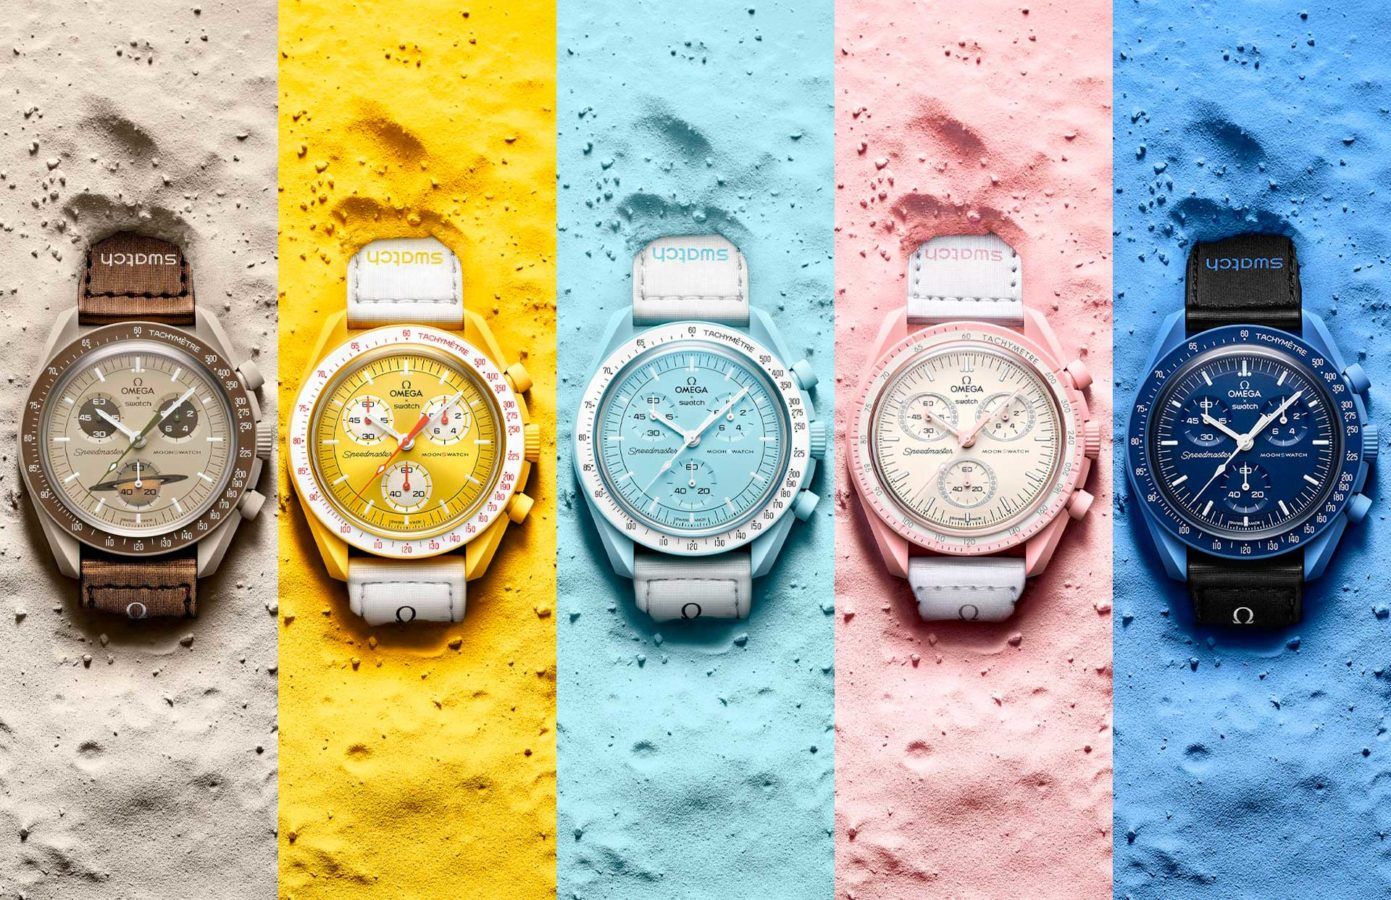 Here is where you can buy the Omega X Swatch MoonSwatch watches online